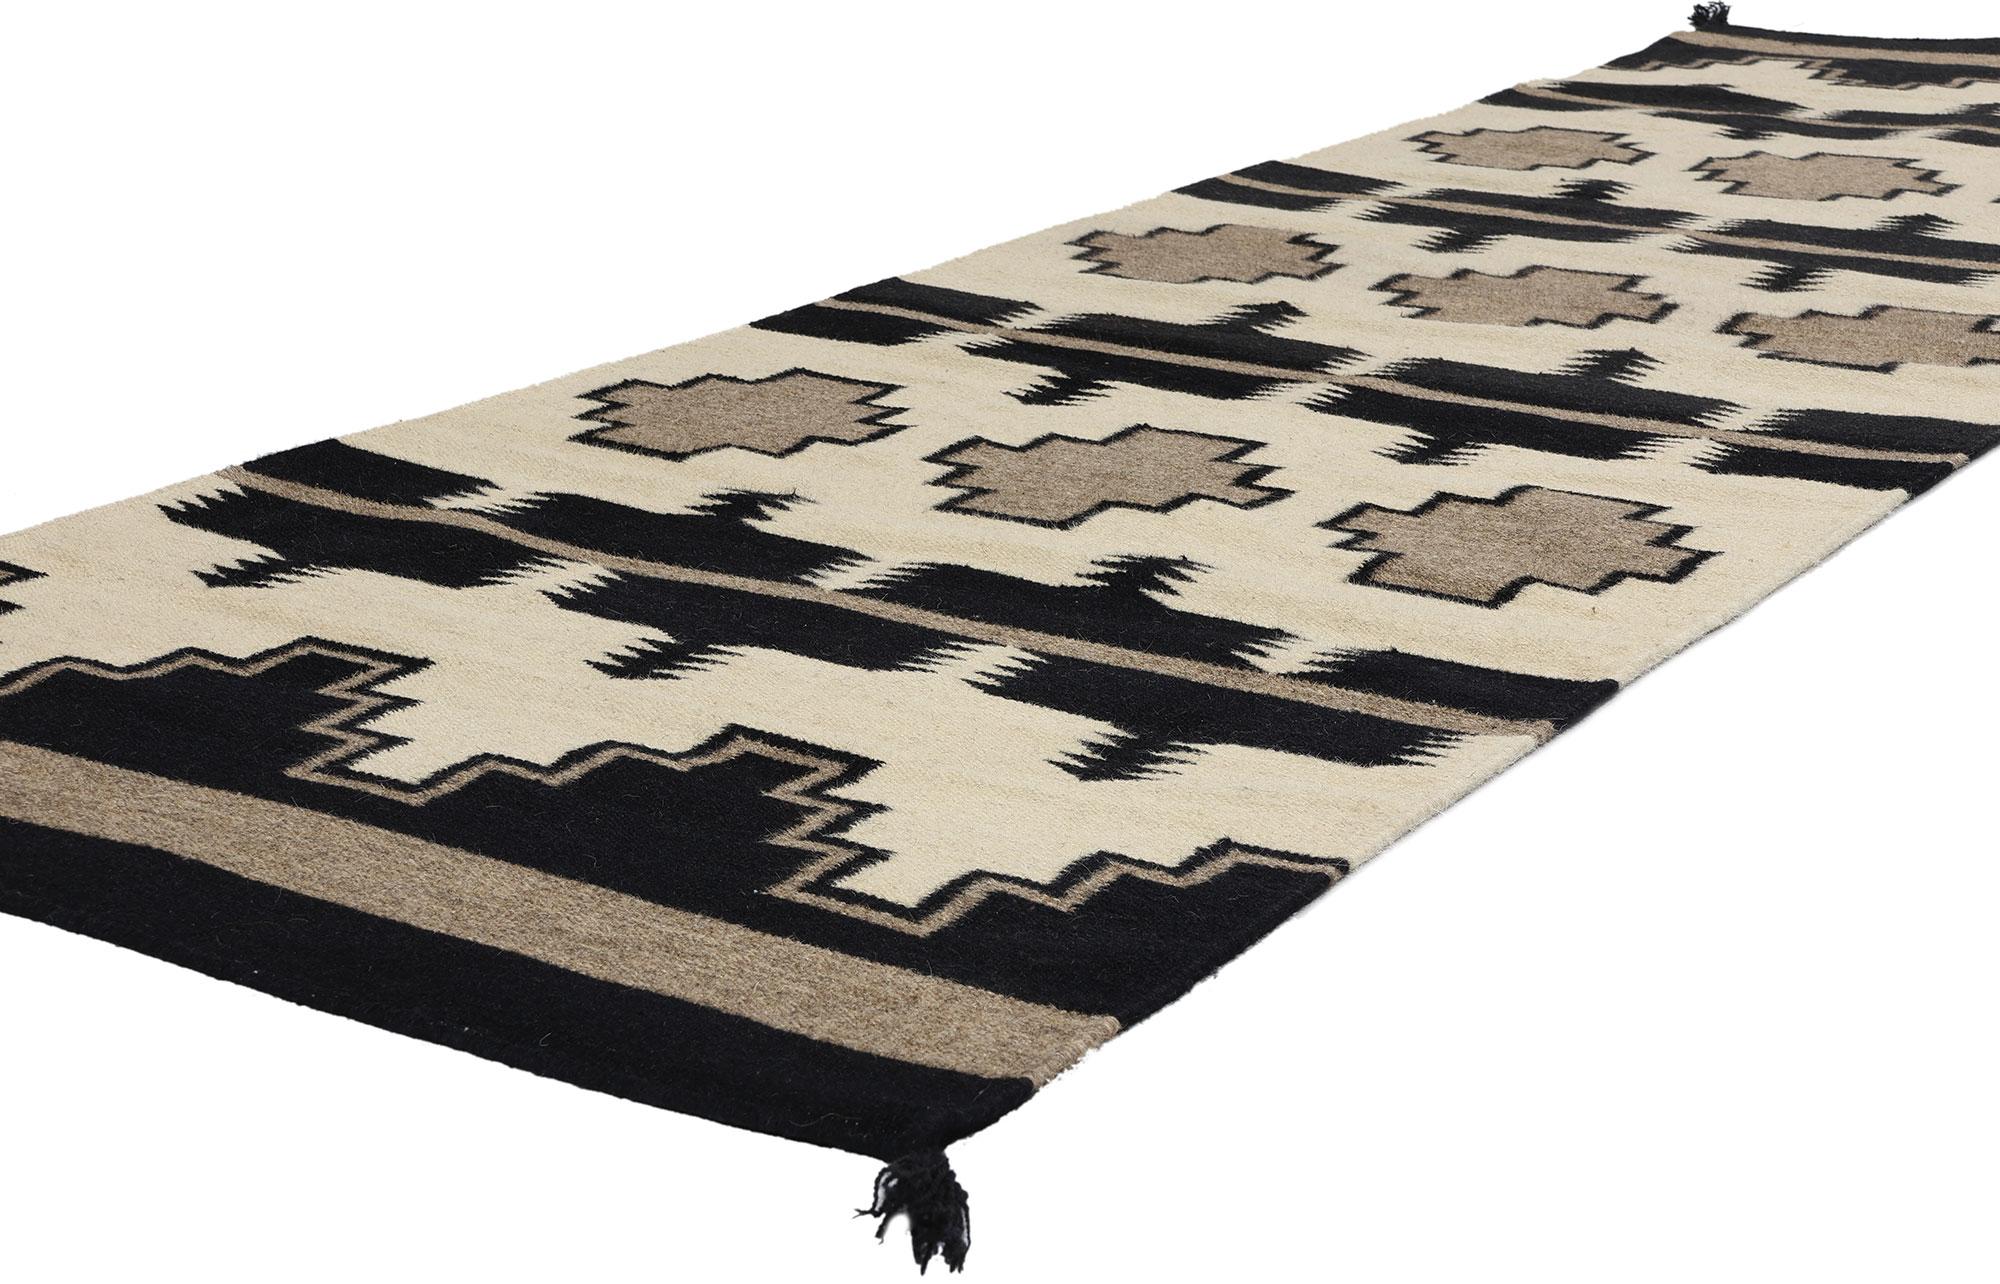 81050 Southwest Modern Crystal Navajo-Style Rug Runner, 03'00 x 10'02. Enter the serene convergence of Native American design influences, where the captivating allure of Southwest Modern aesthetics gracefully melds with the seamless fusion of